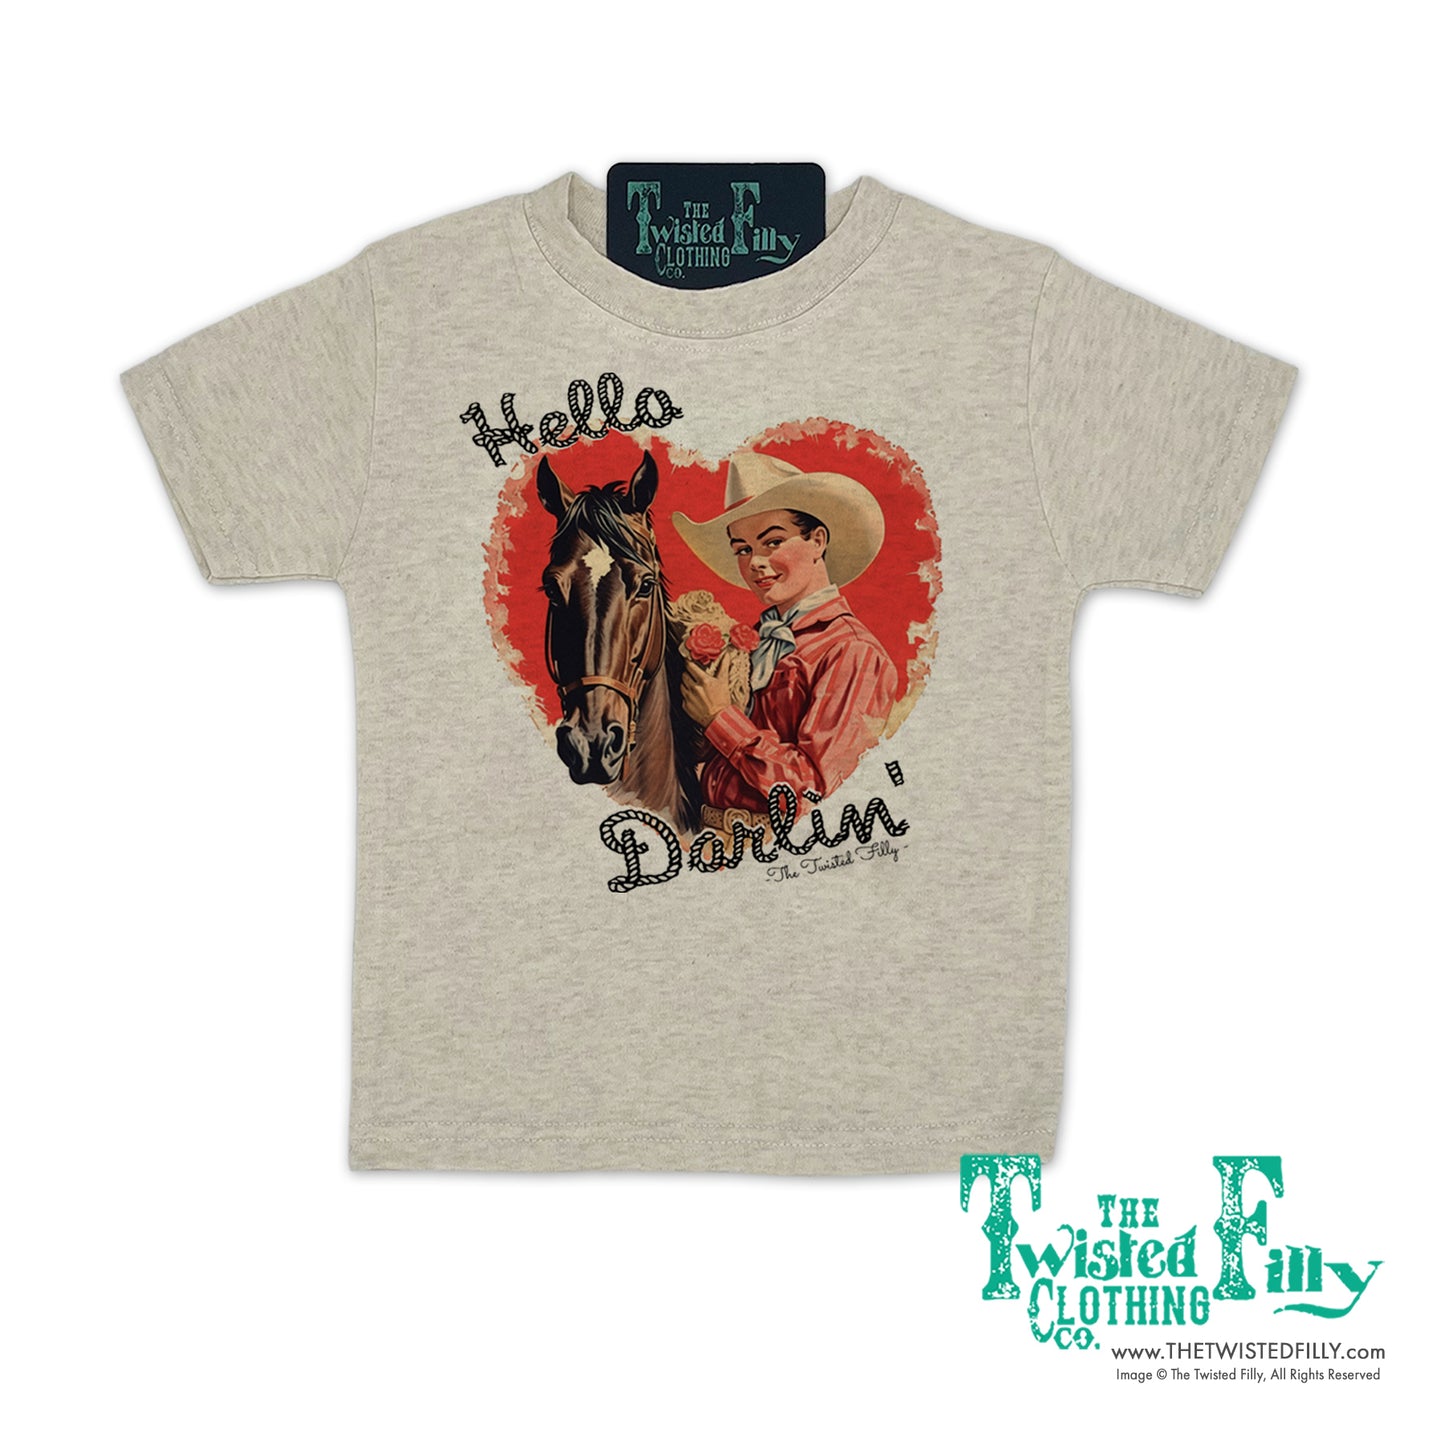 Hello Darlin' - S/S Toddler Tee - Assorted Colors